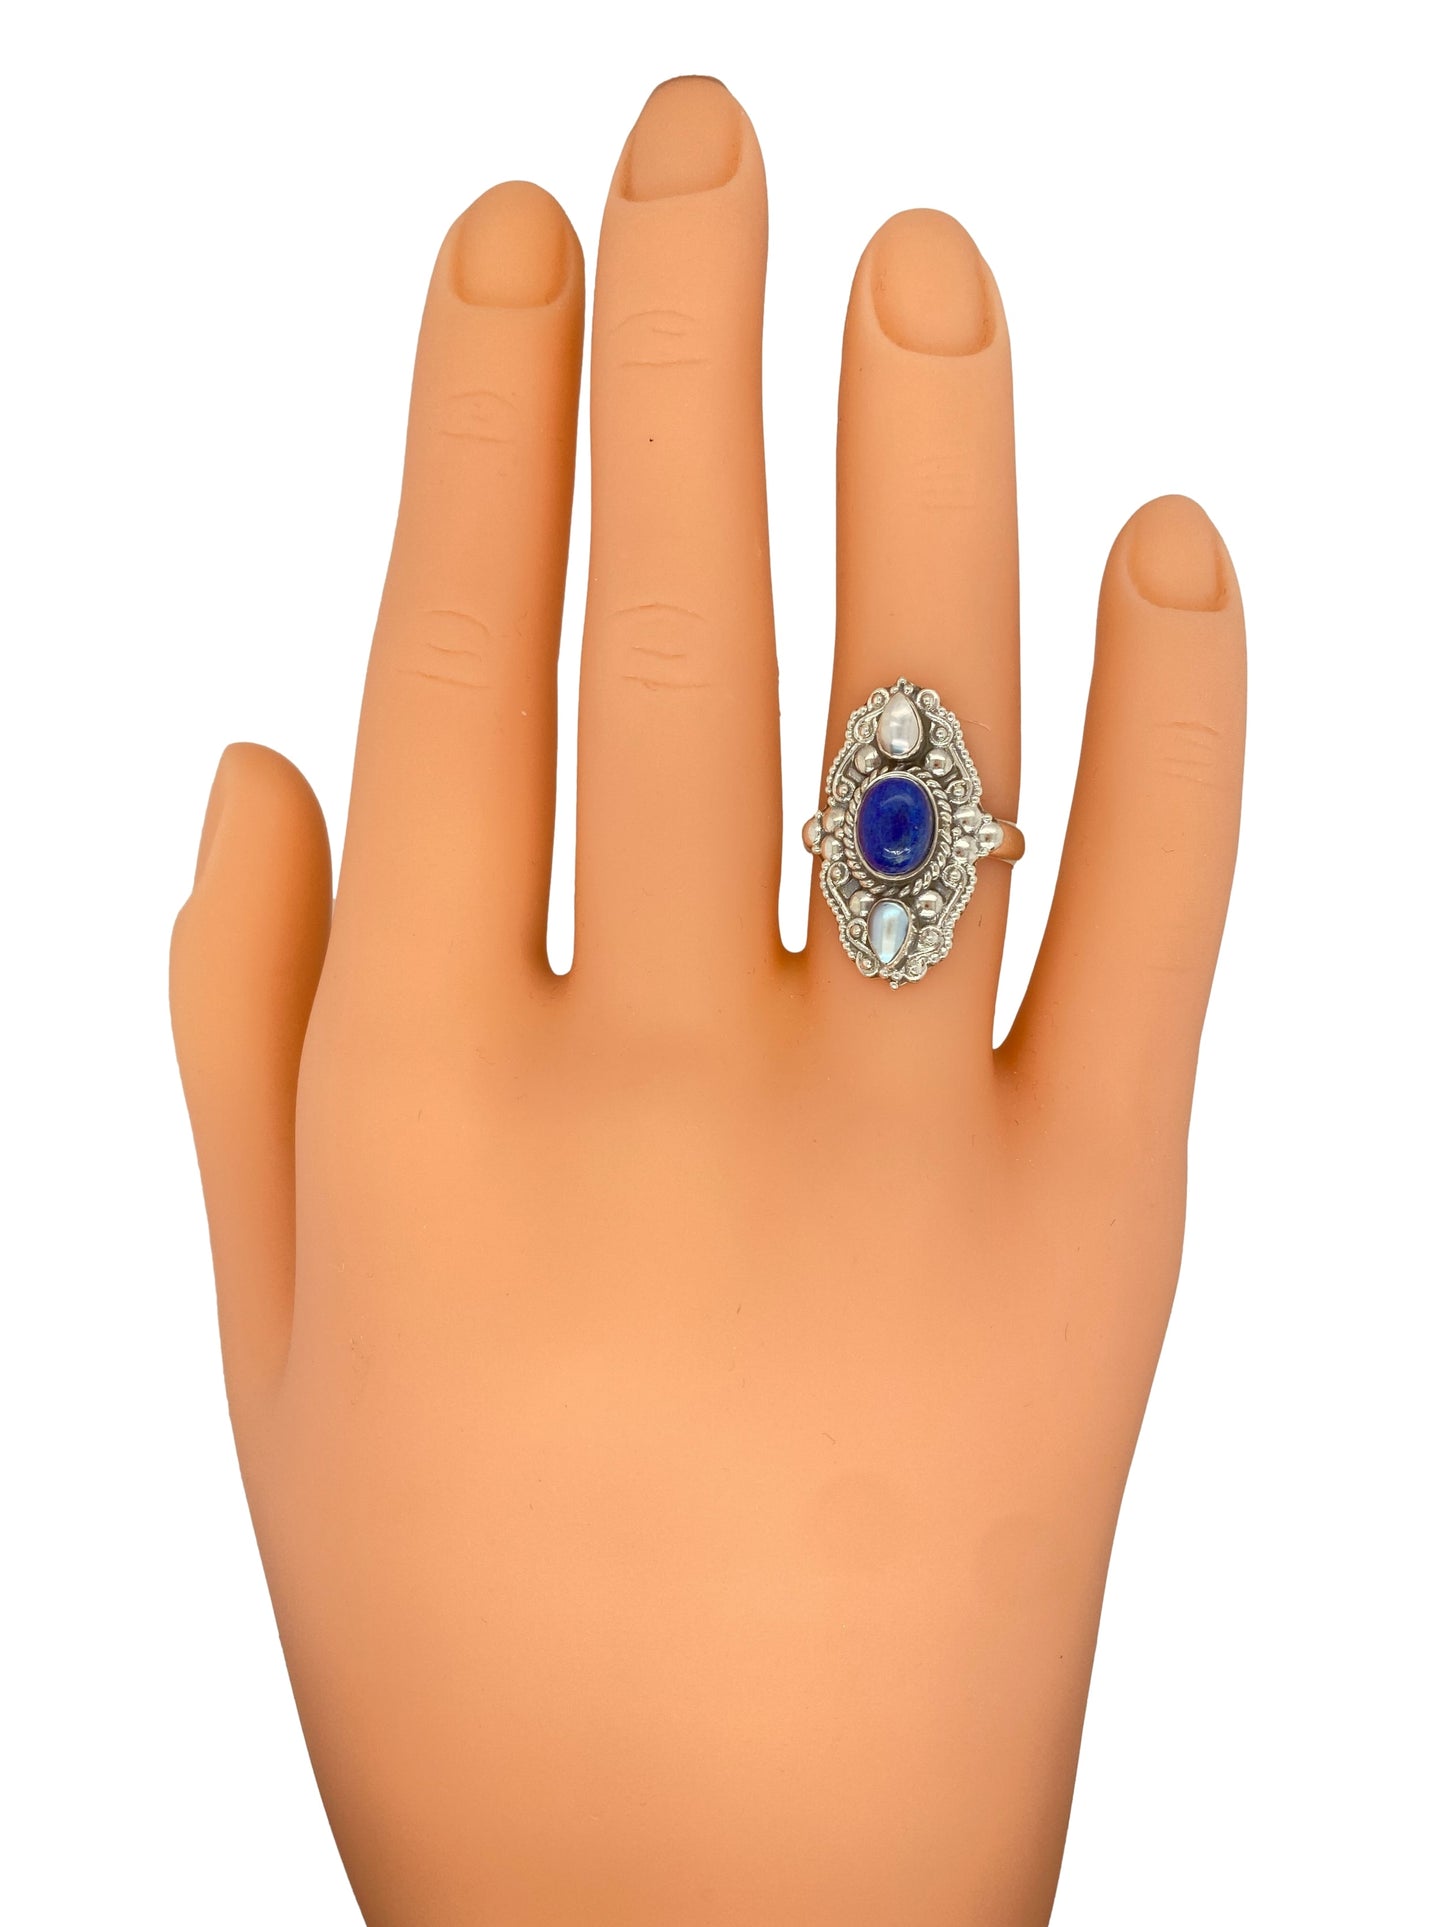 Circa 1990s Lapis Lazuli and Baroque Pearl Ring in Sterling Silver